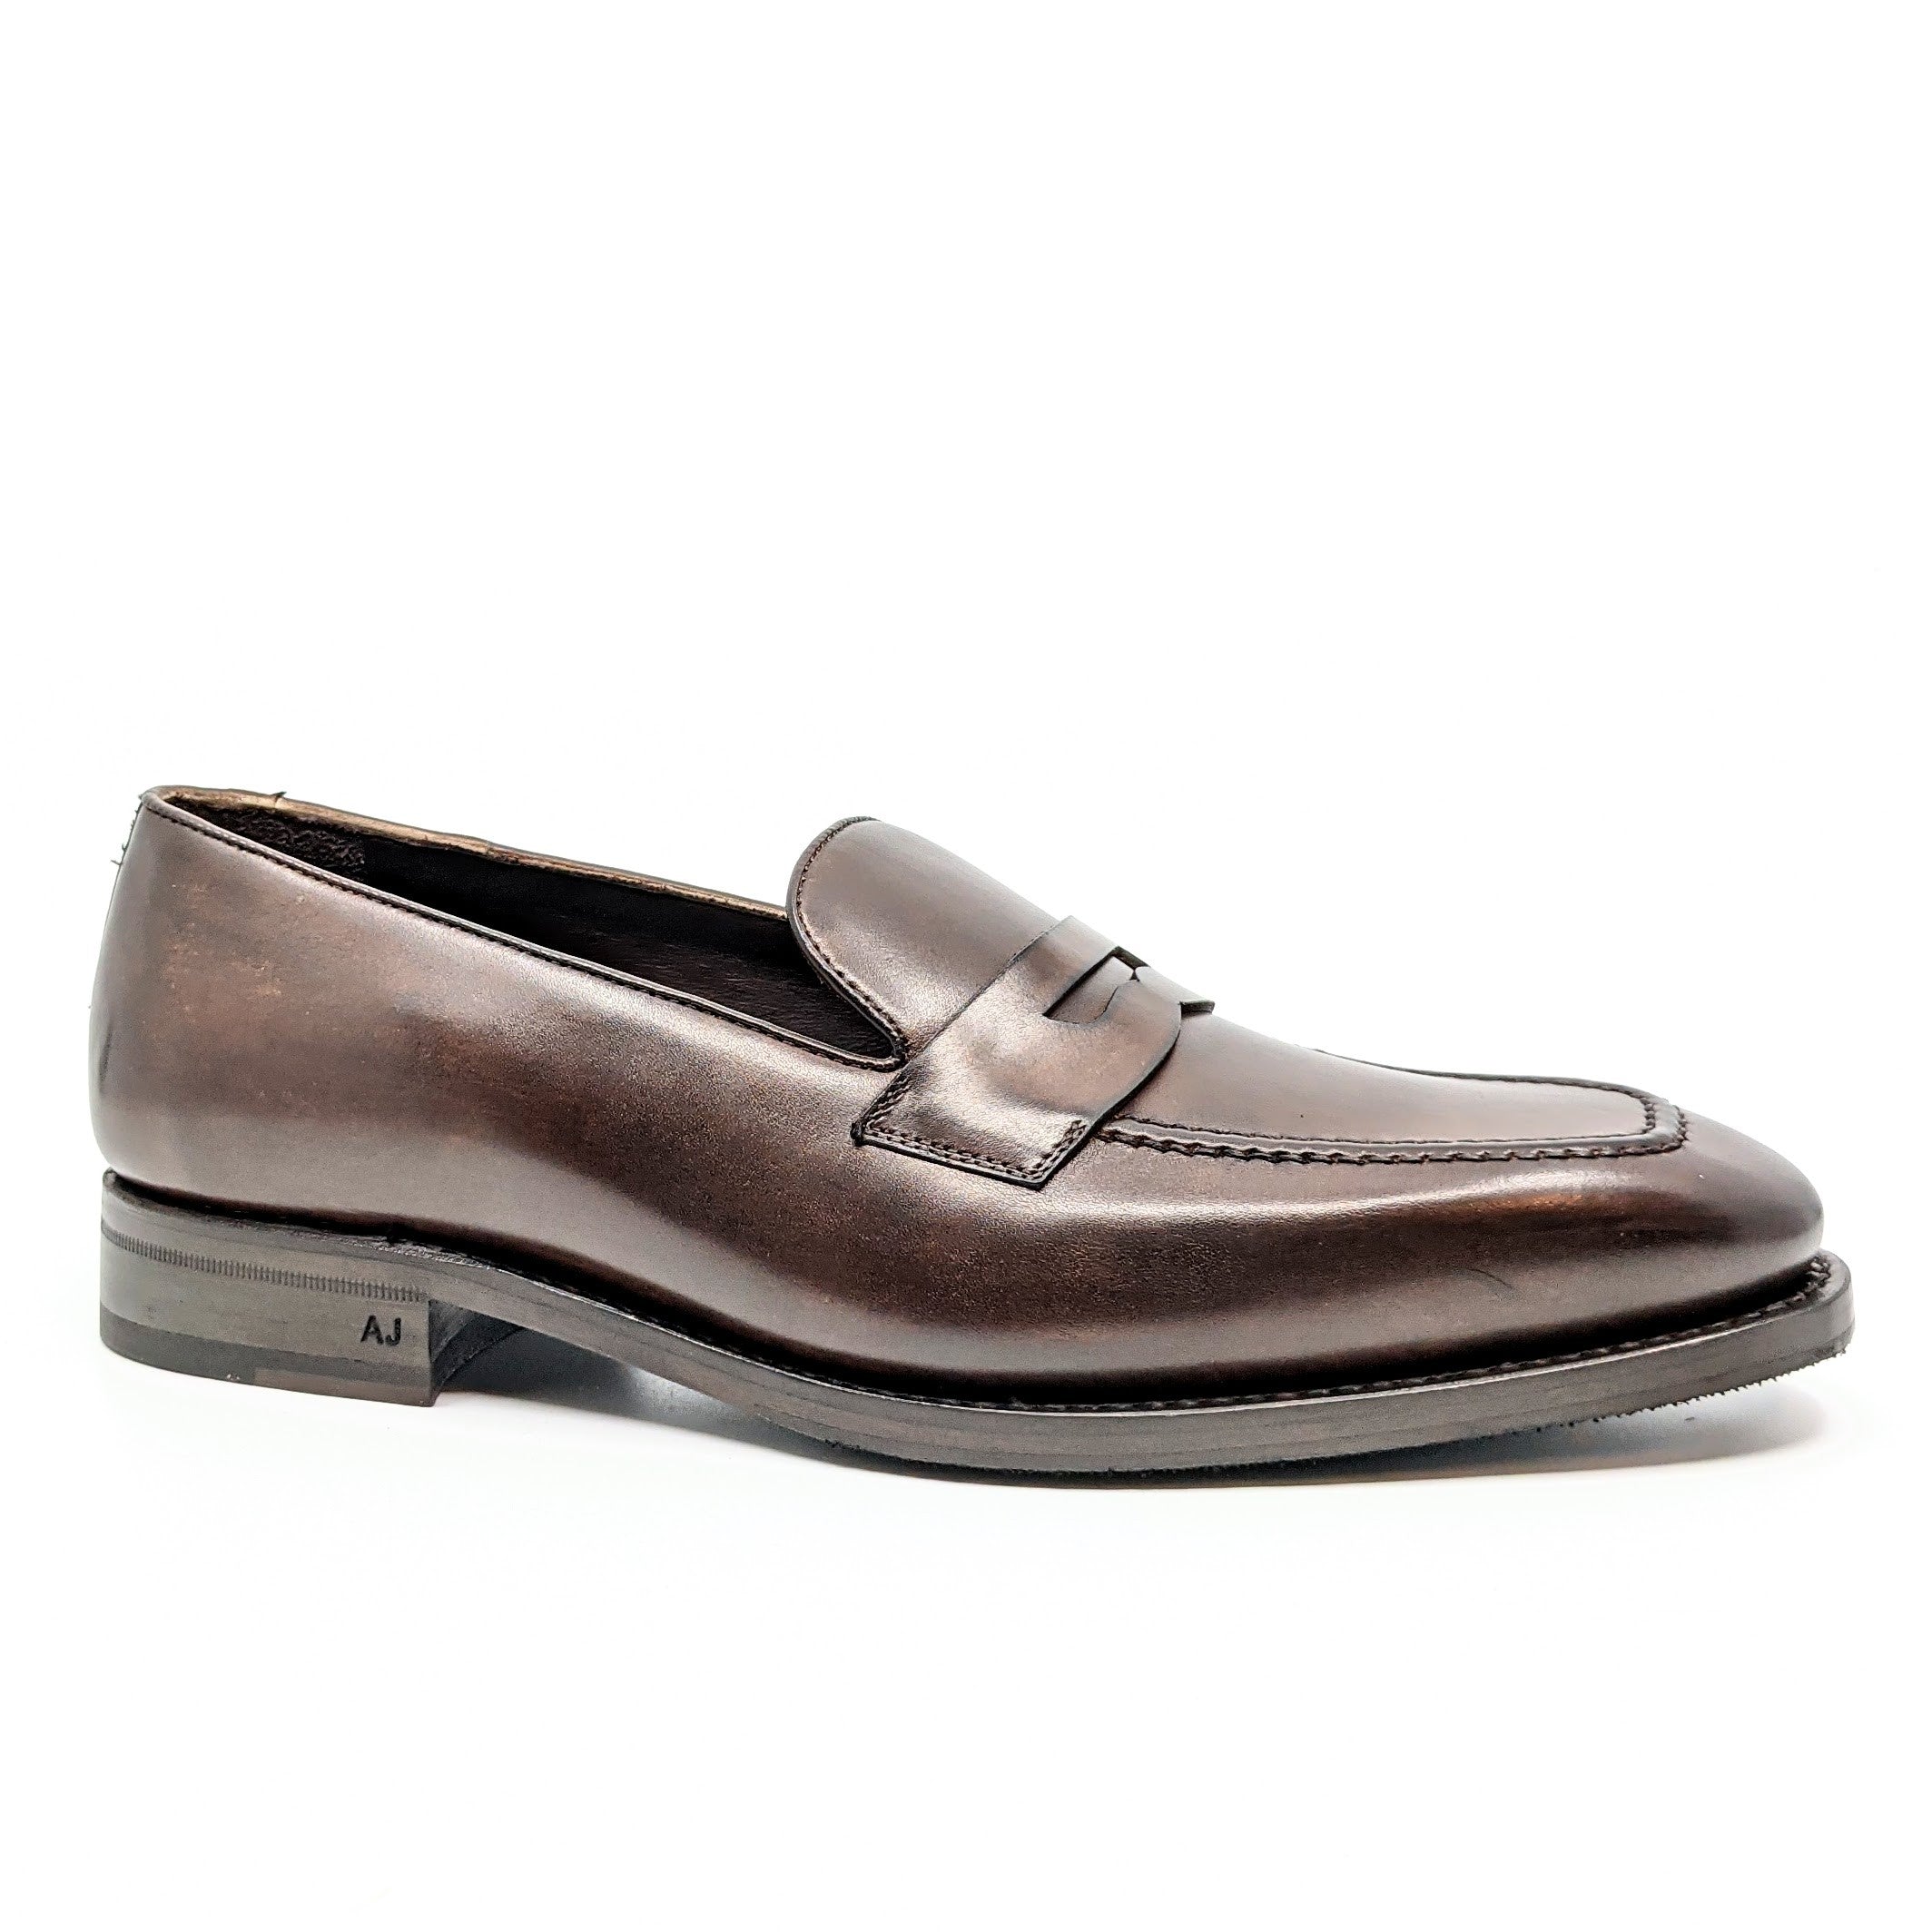 Crossover Footwear's Exclusive Loafer Collection | Premium Quality ...